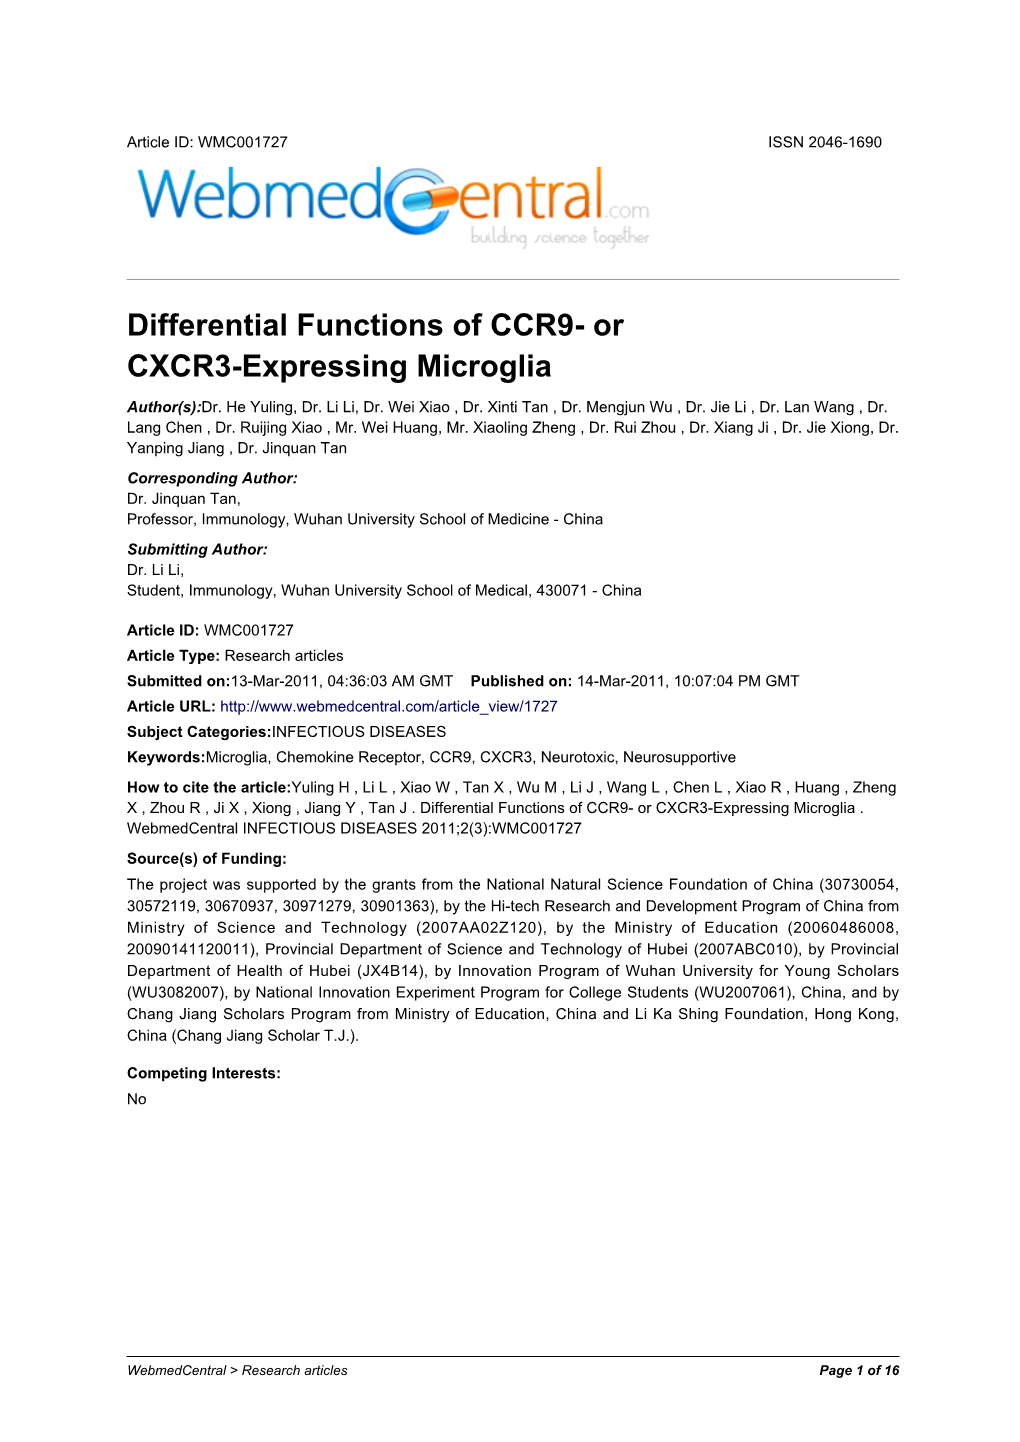 Differential Functions of CCR9- Or CXCR3-Expressing Microglia